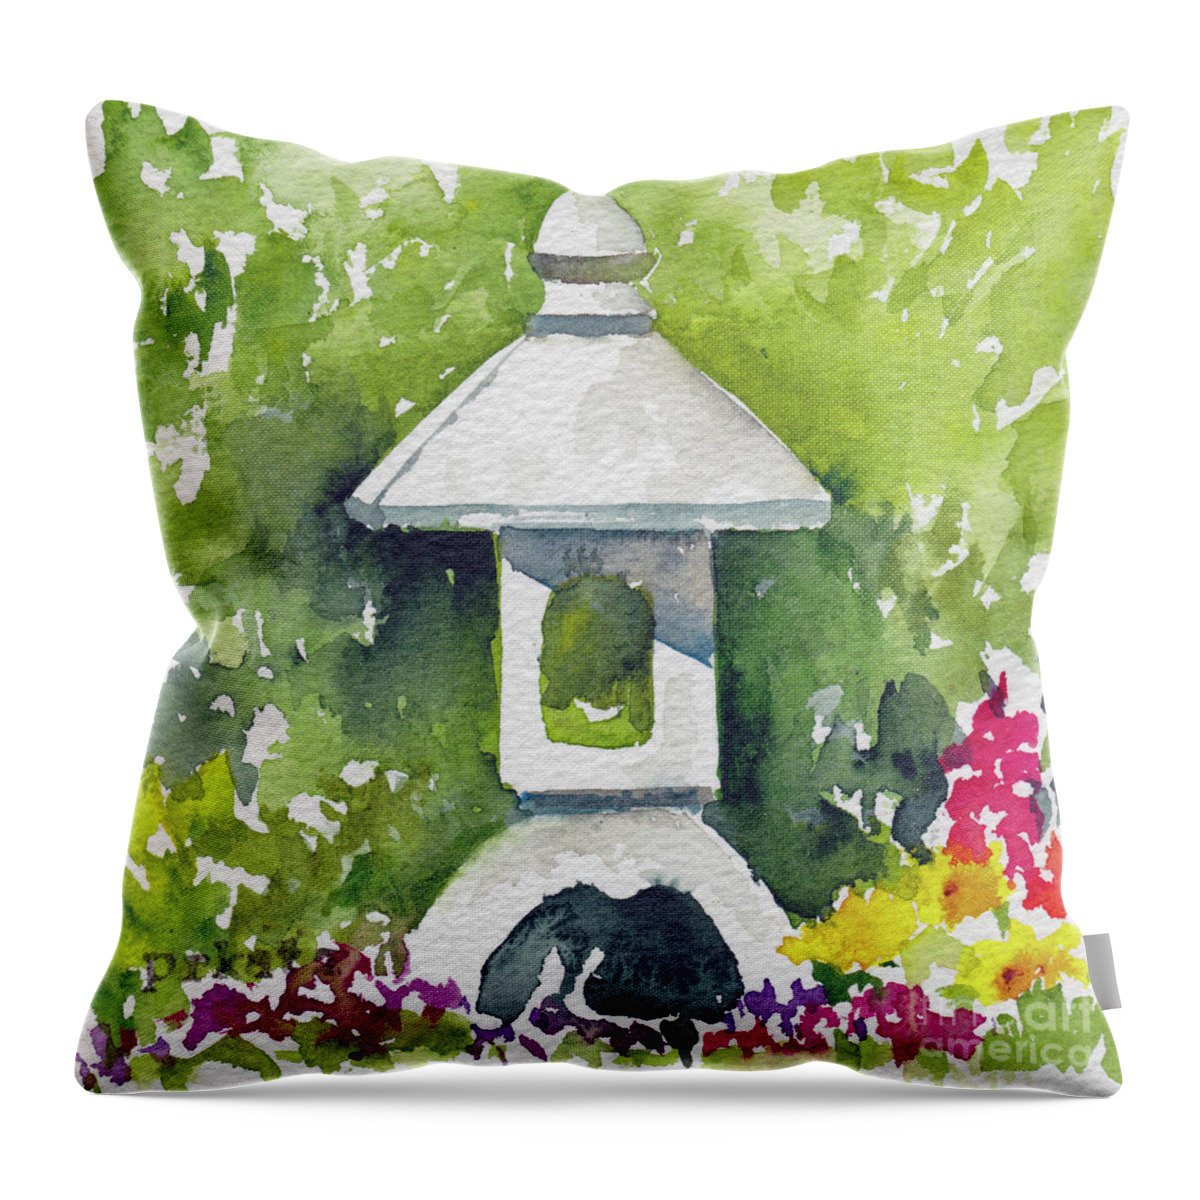 Impressionism Throw Pillow featuring the painting Pause Garden Japanese Lantern 2 by Pat Katz